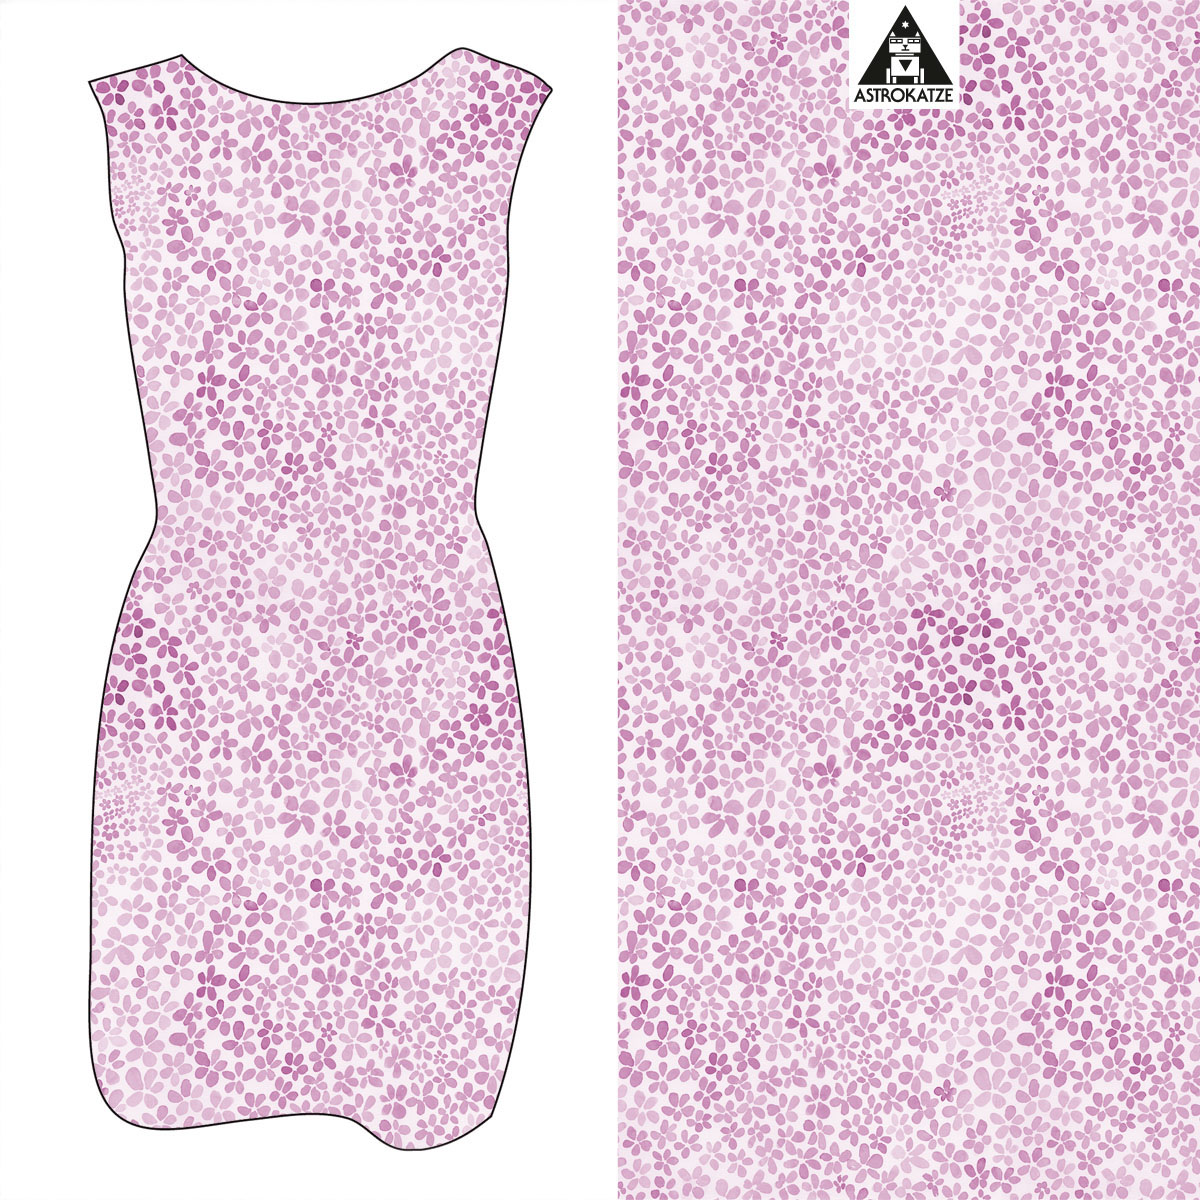 ColorBlossom Berry Jersey